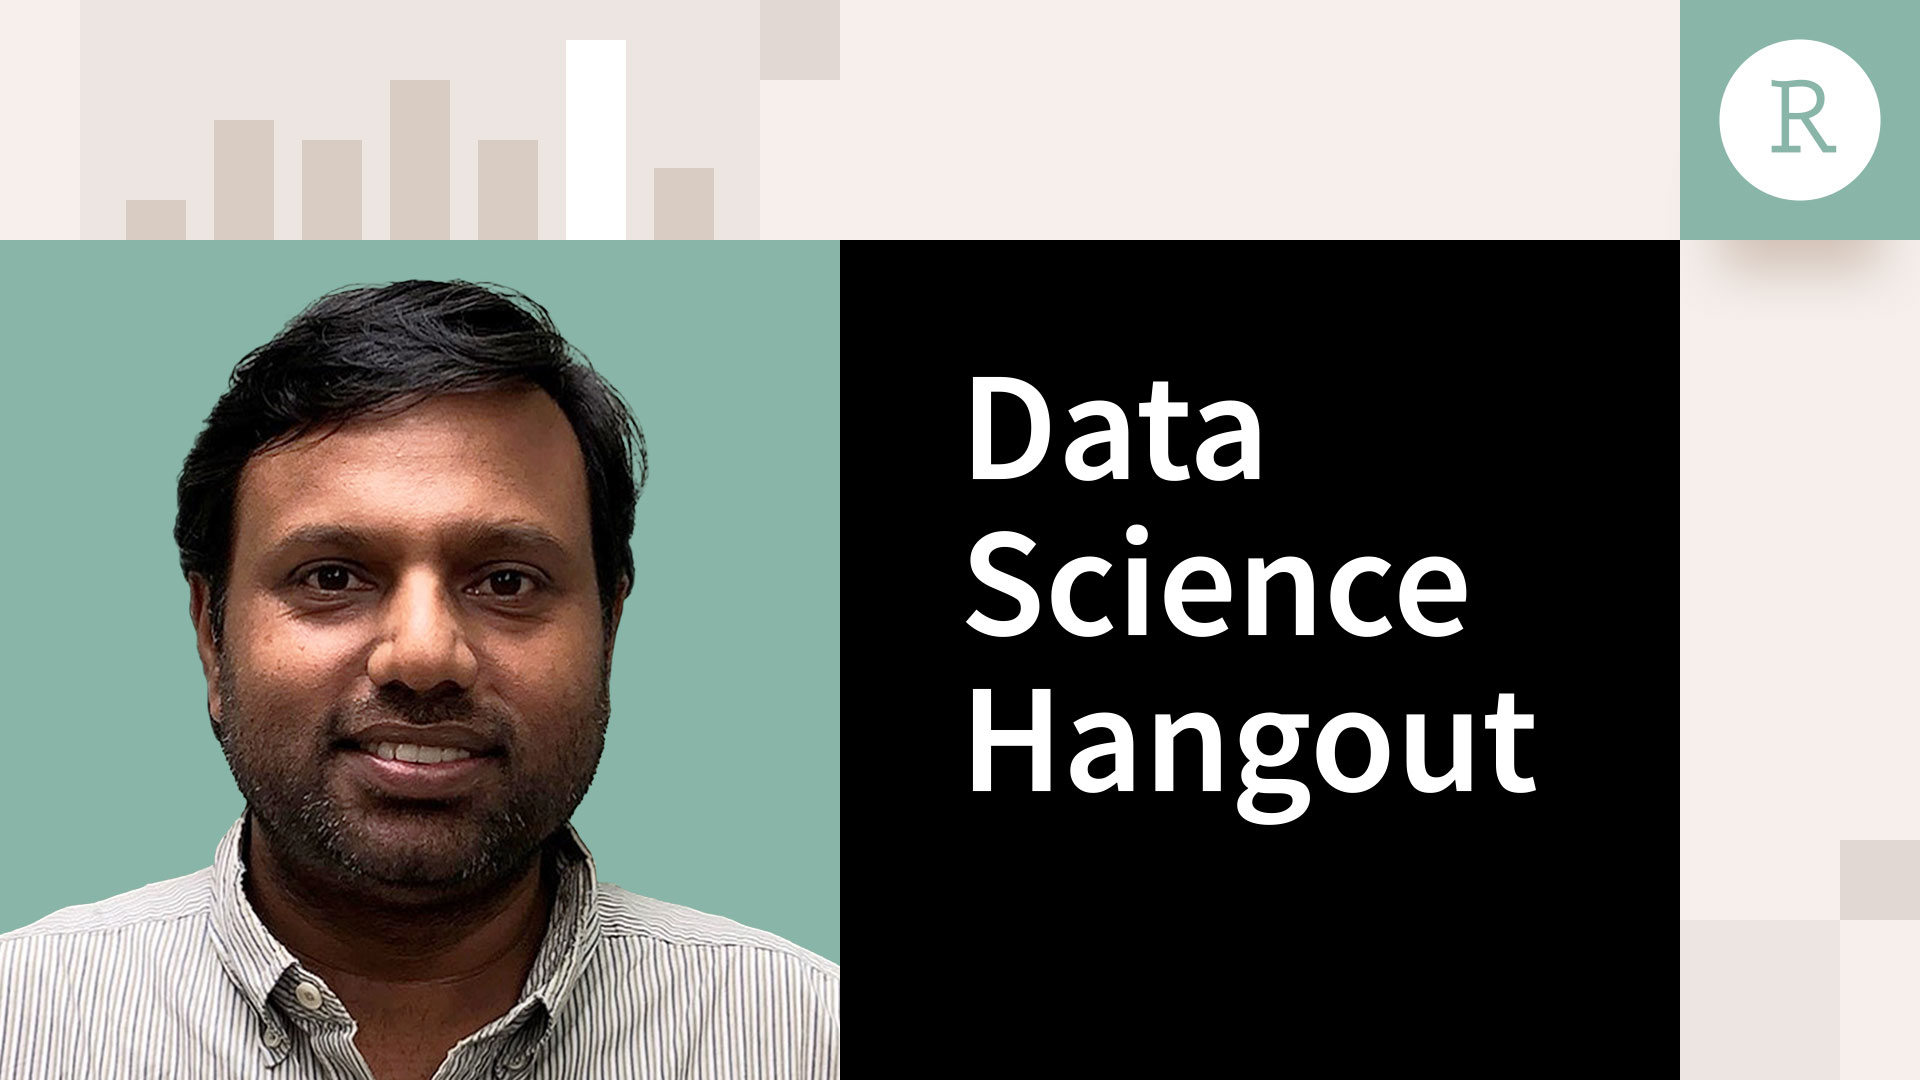 Data Science Hangout with Prabha